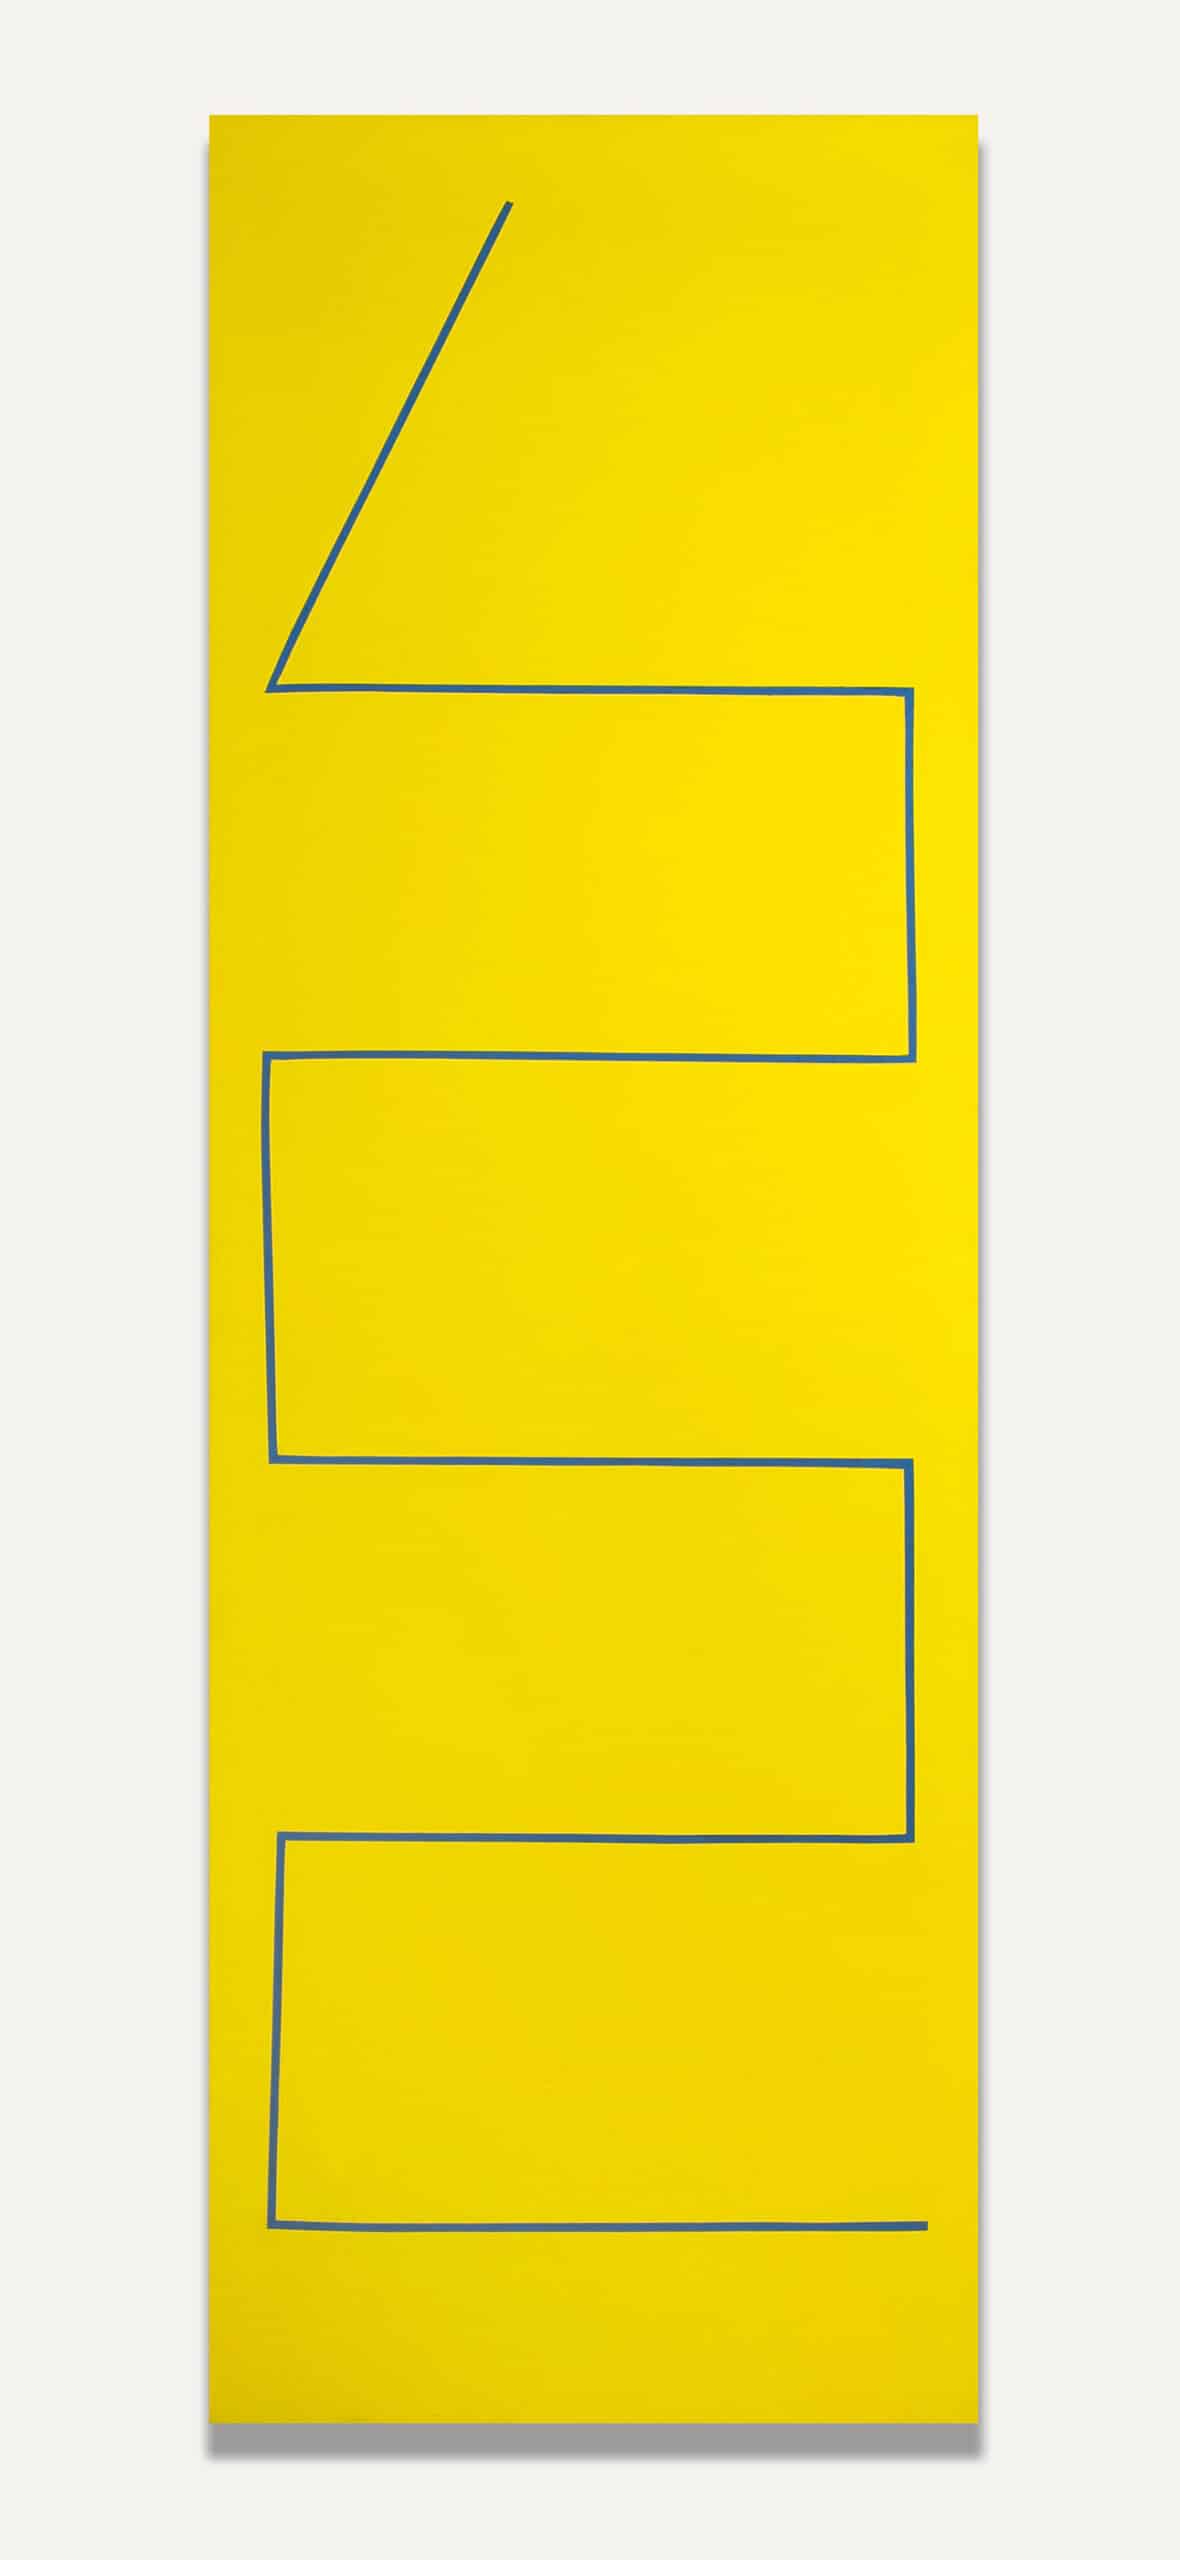 Event in Yellow, 1994. Paint on canvas. Canvas: 72 x 24 in.